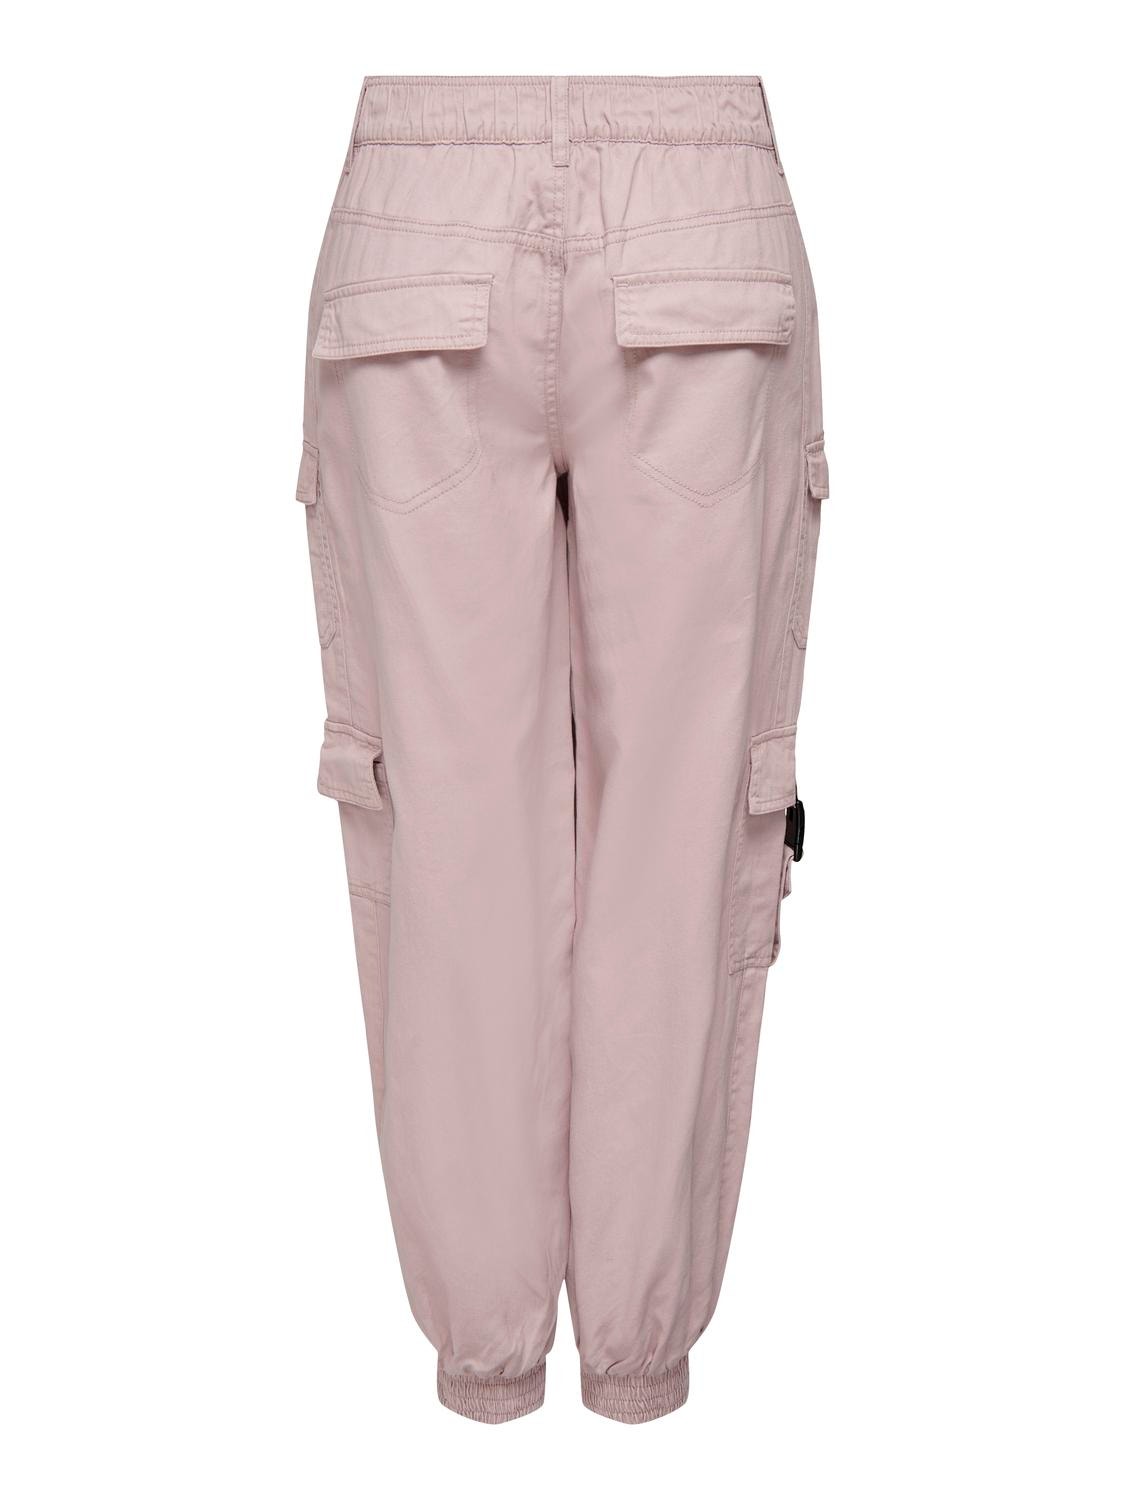 ONLY Loose fit cargo pants -Adobe Rose - 15293051